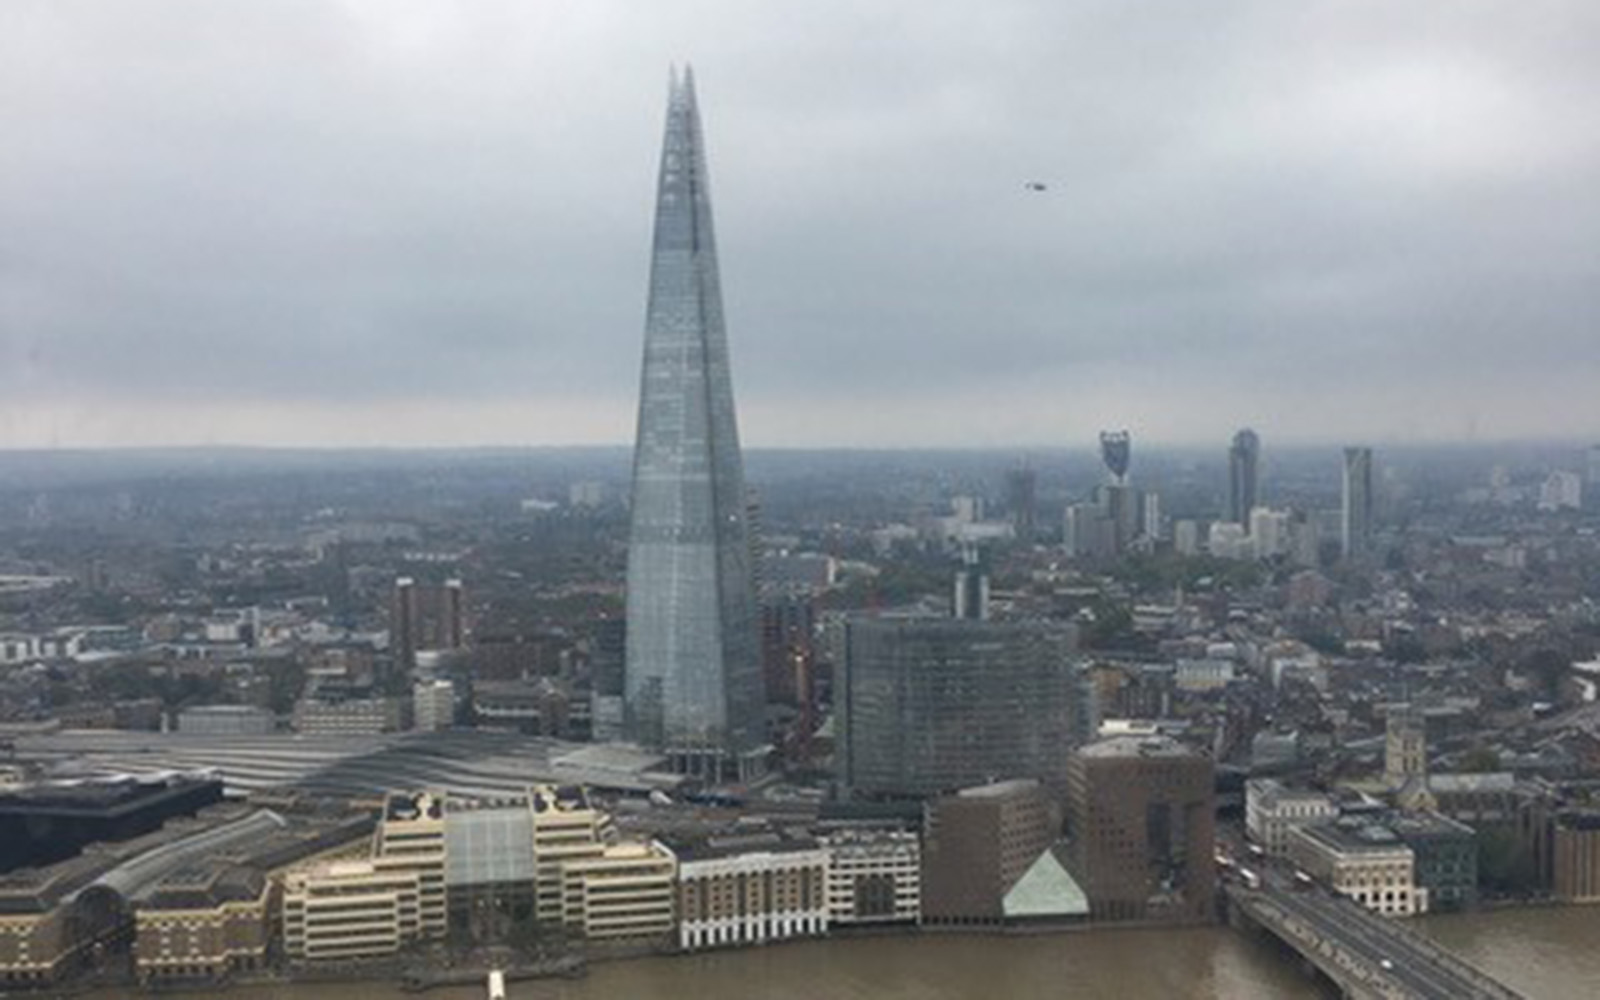 "The Shard" as viewed from the Sky Garden in London (Brendan Mulcahey/UConn School of Business)